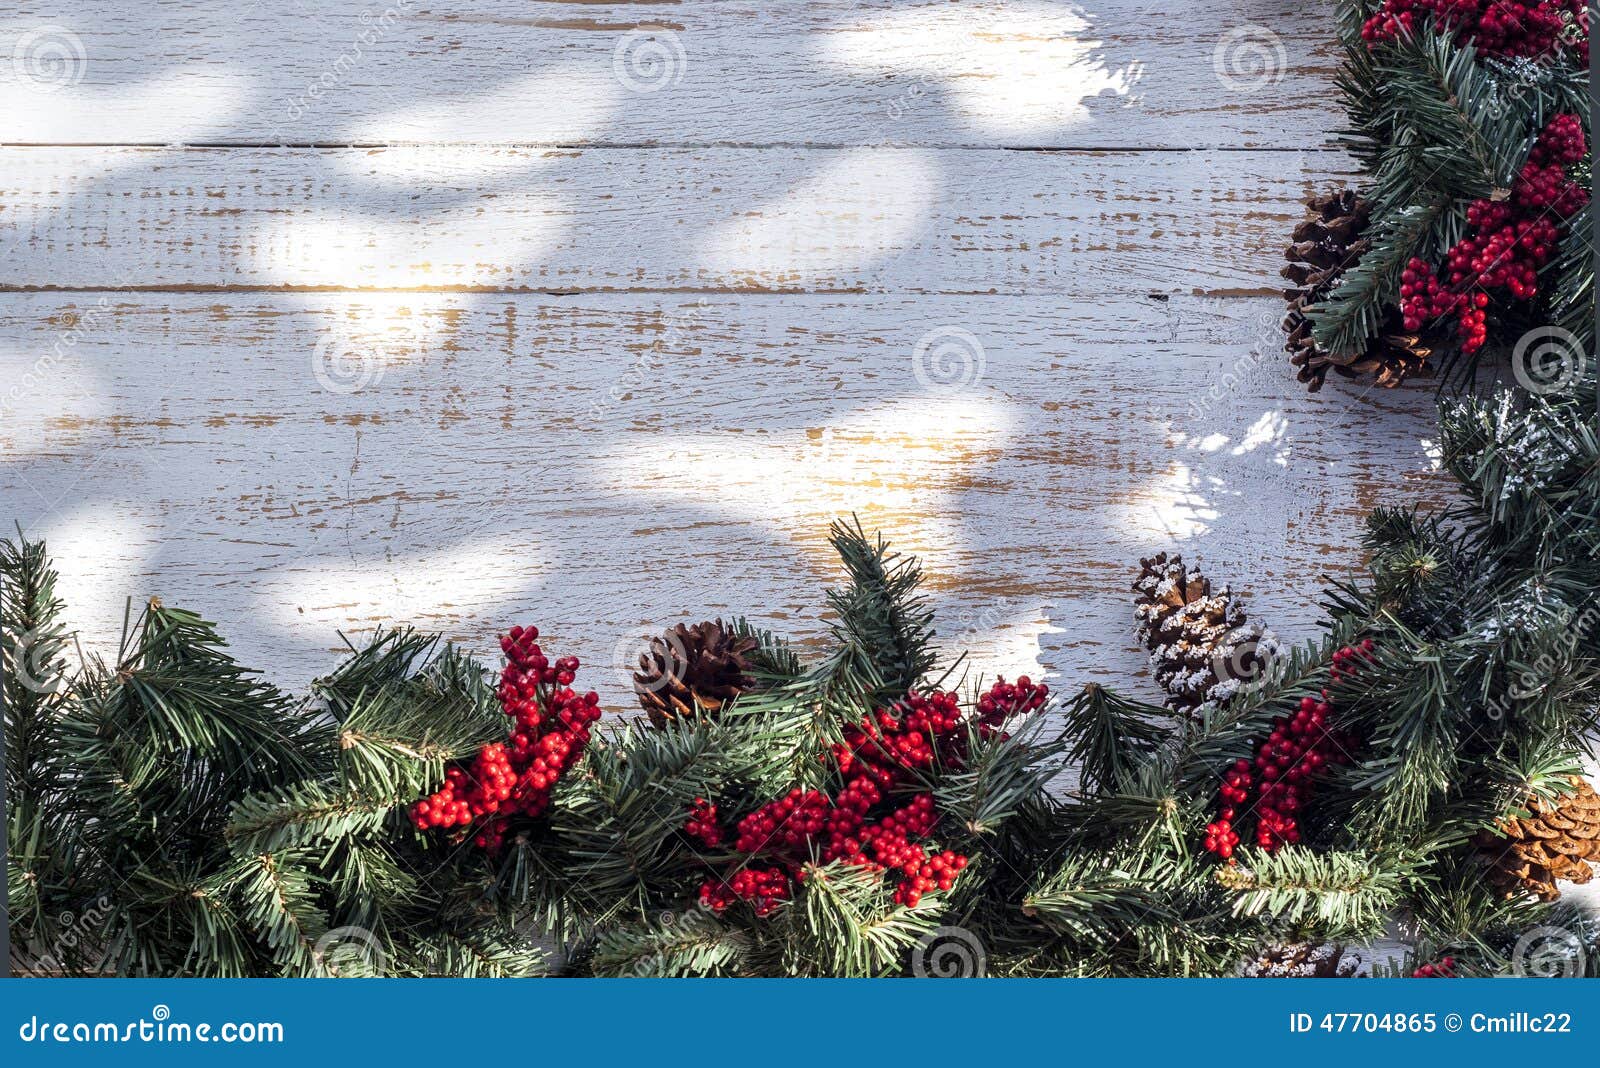 christmas garland on country porch